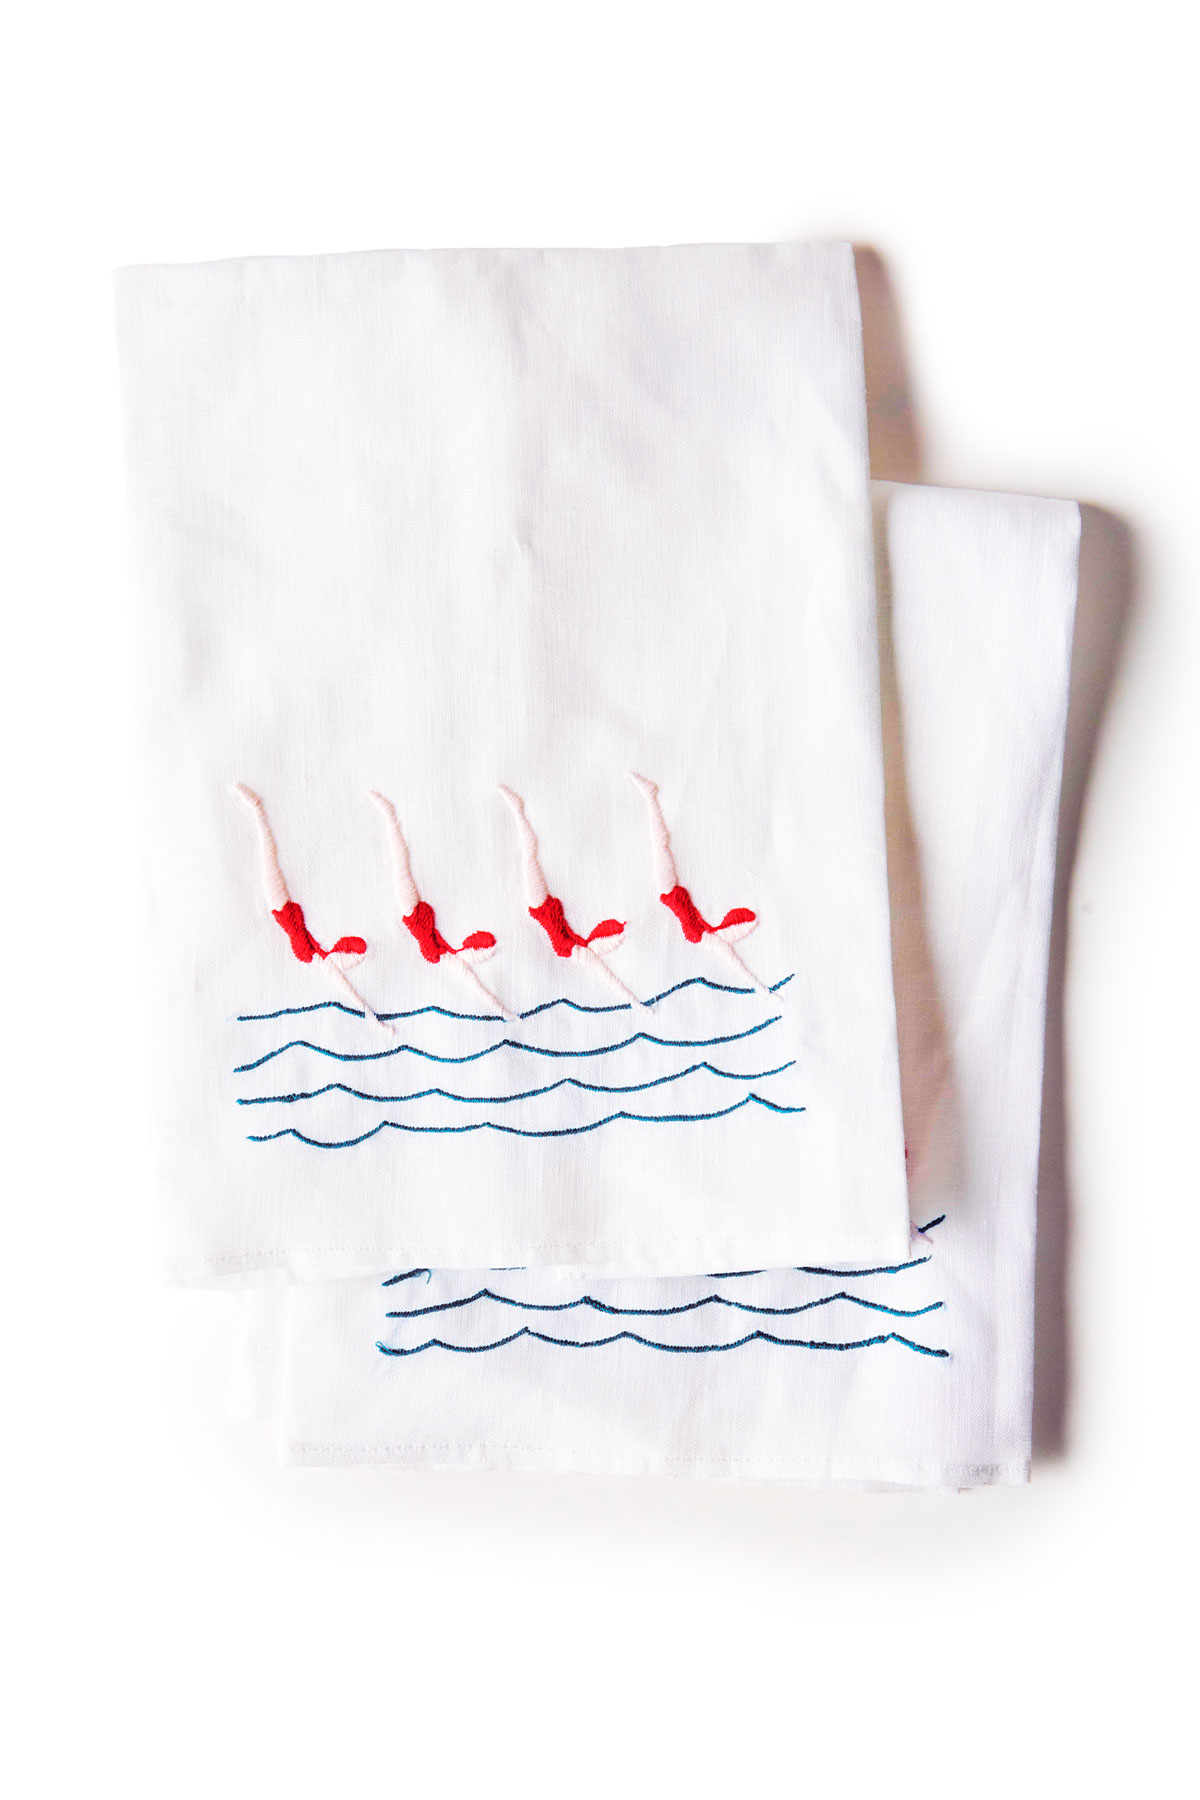 Divers Tea Towels from Coco & Dash